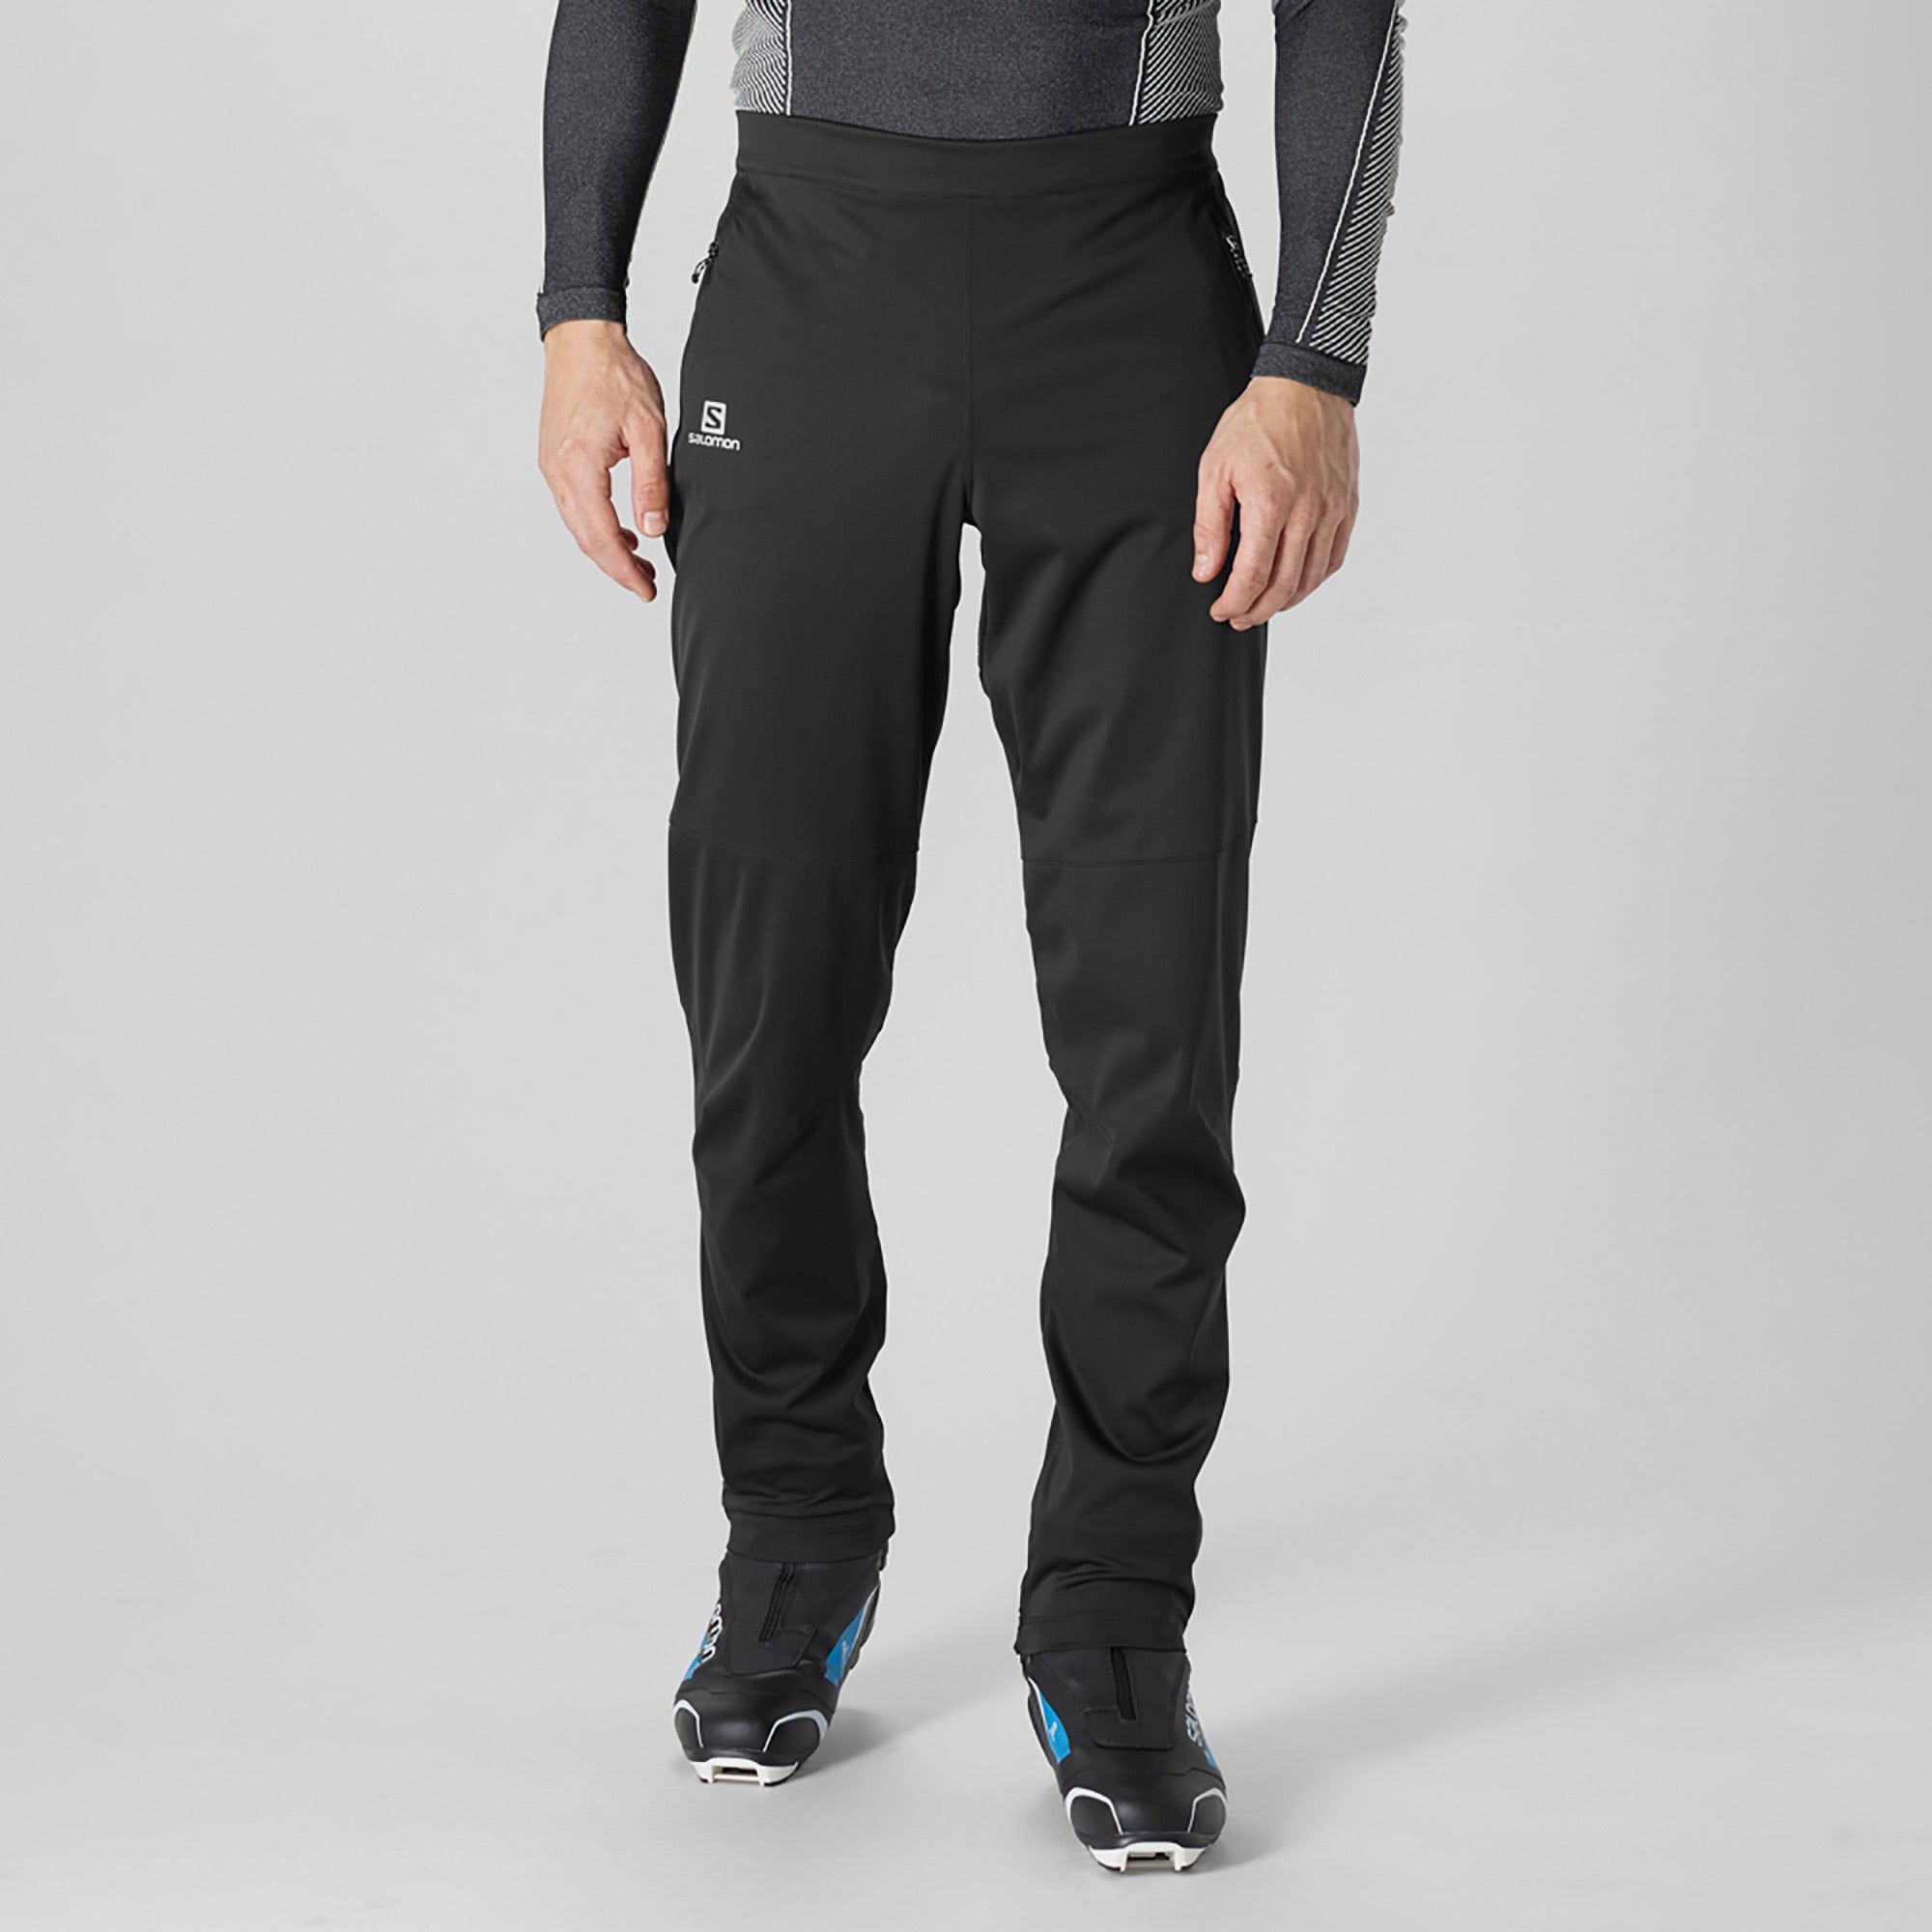 Men's Agile Warm Soft Shell Pants by Salomon – Adventure Outfitters